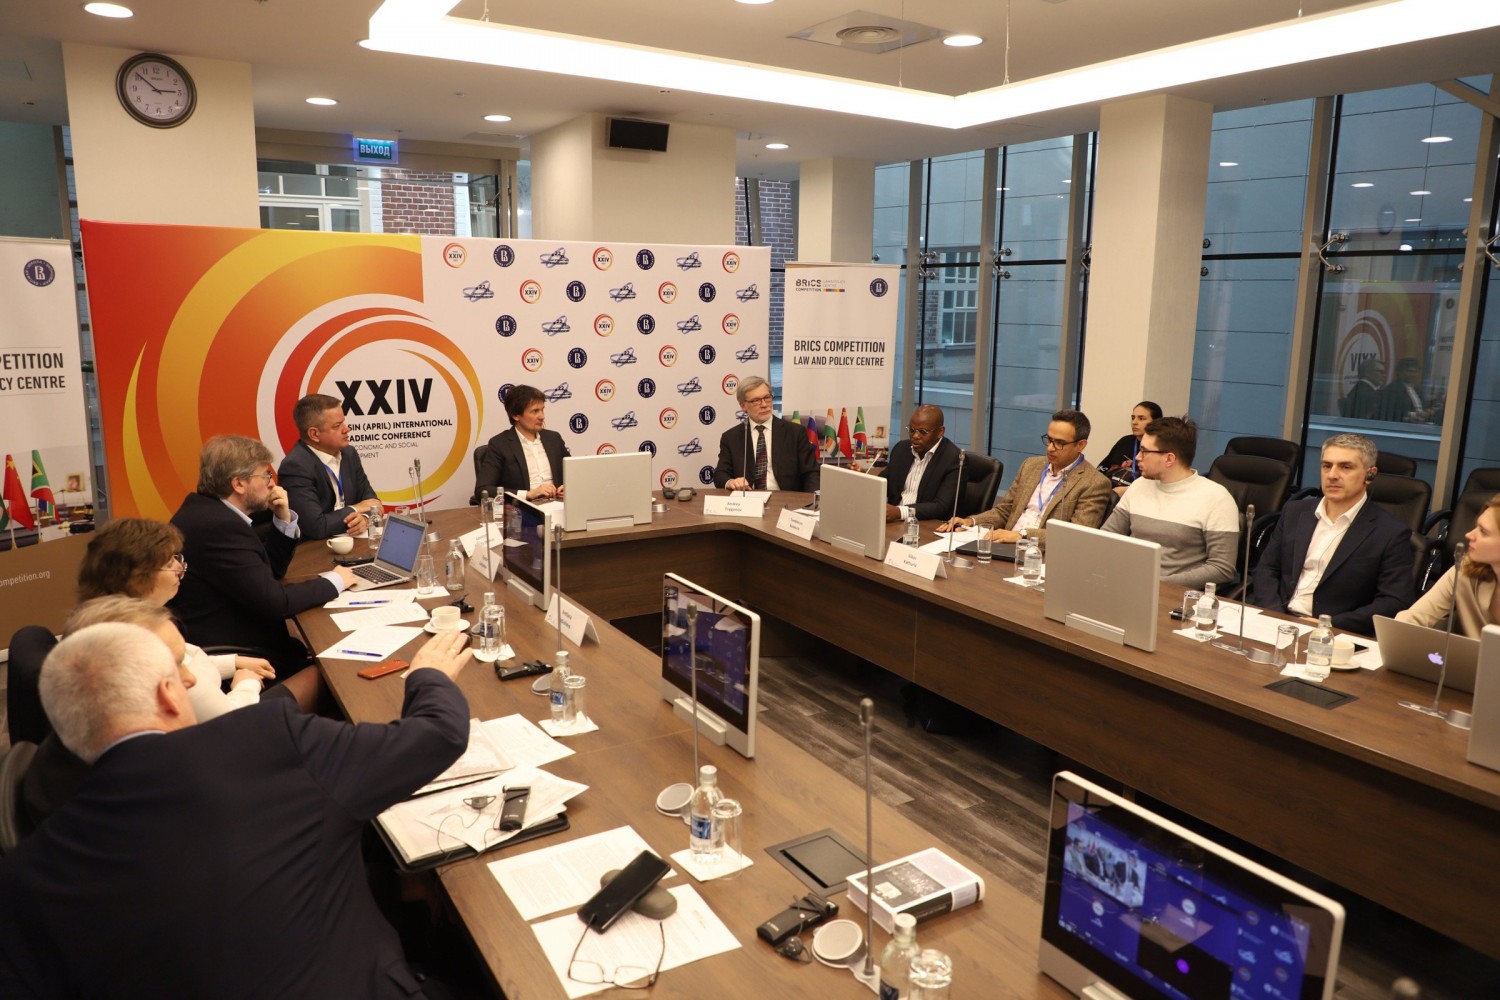 Roundtable on “Markets Regulation under Global Uncertainty: the BRICS Perspective”